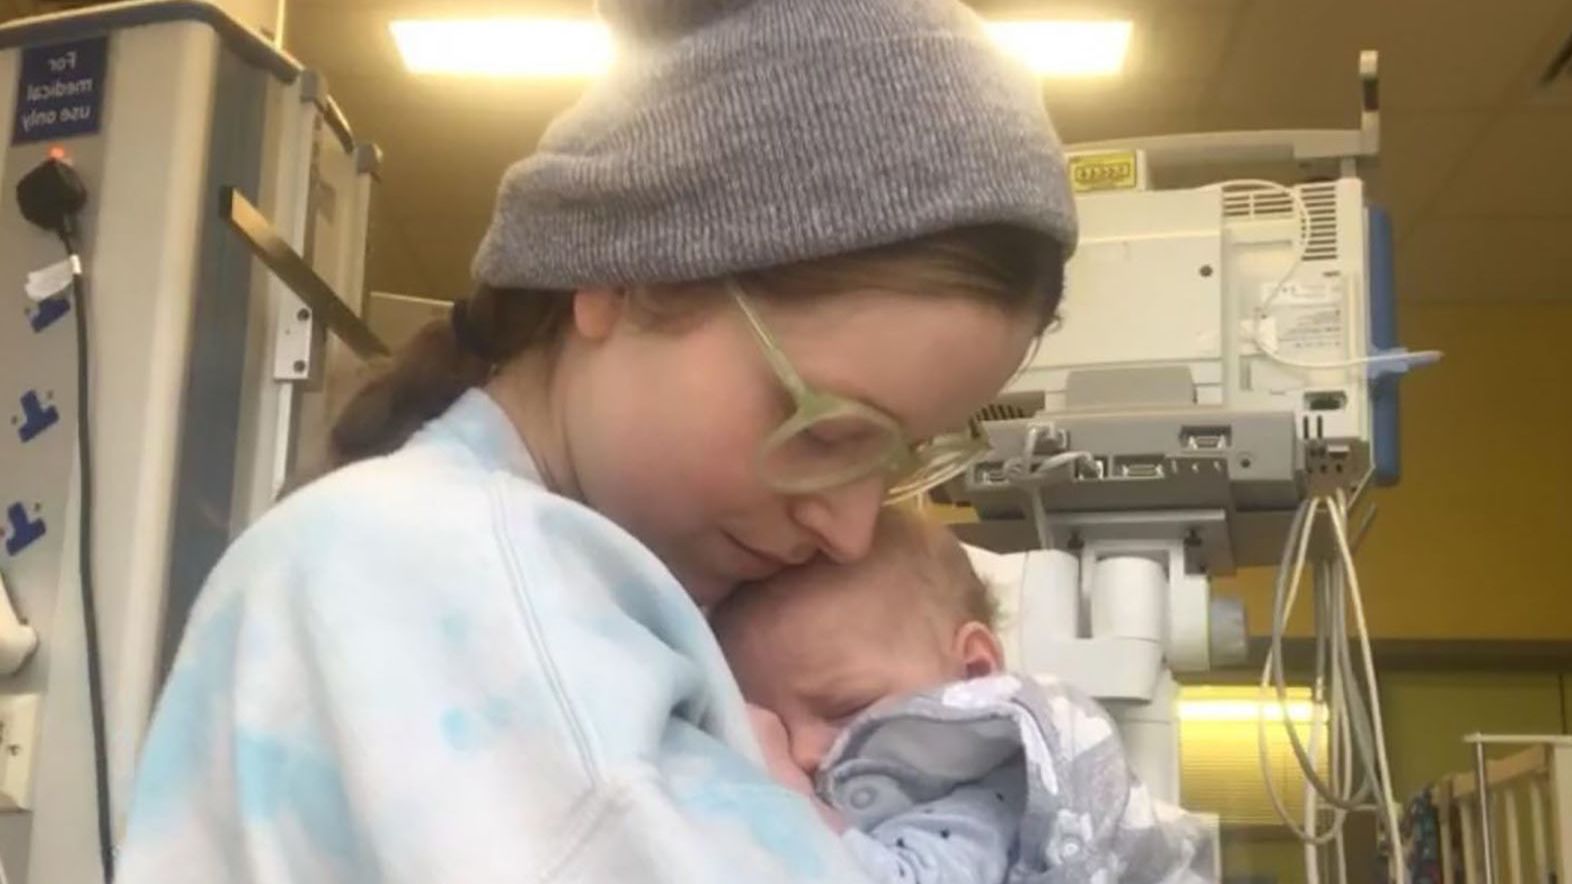 Jessie Cave told fans on Instagram that her baby was now home.